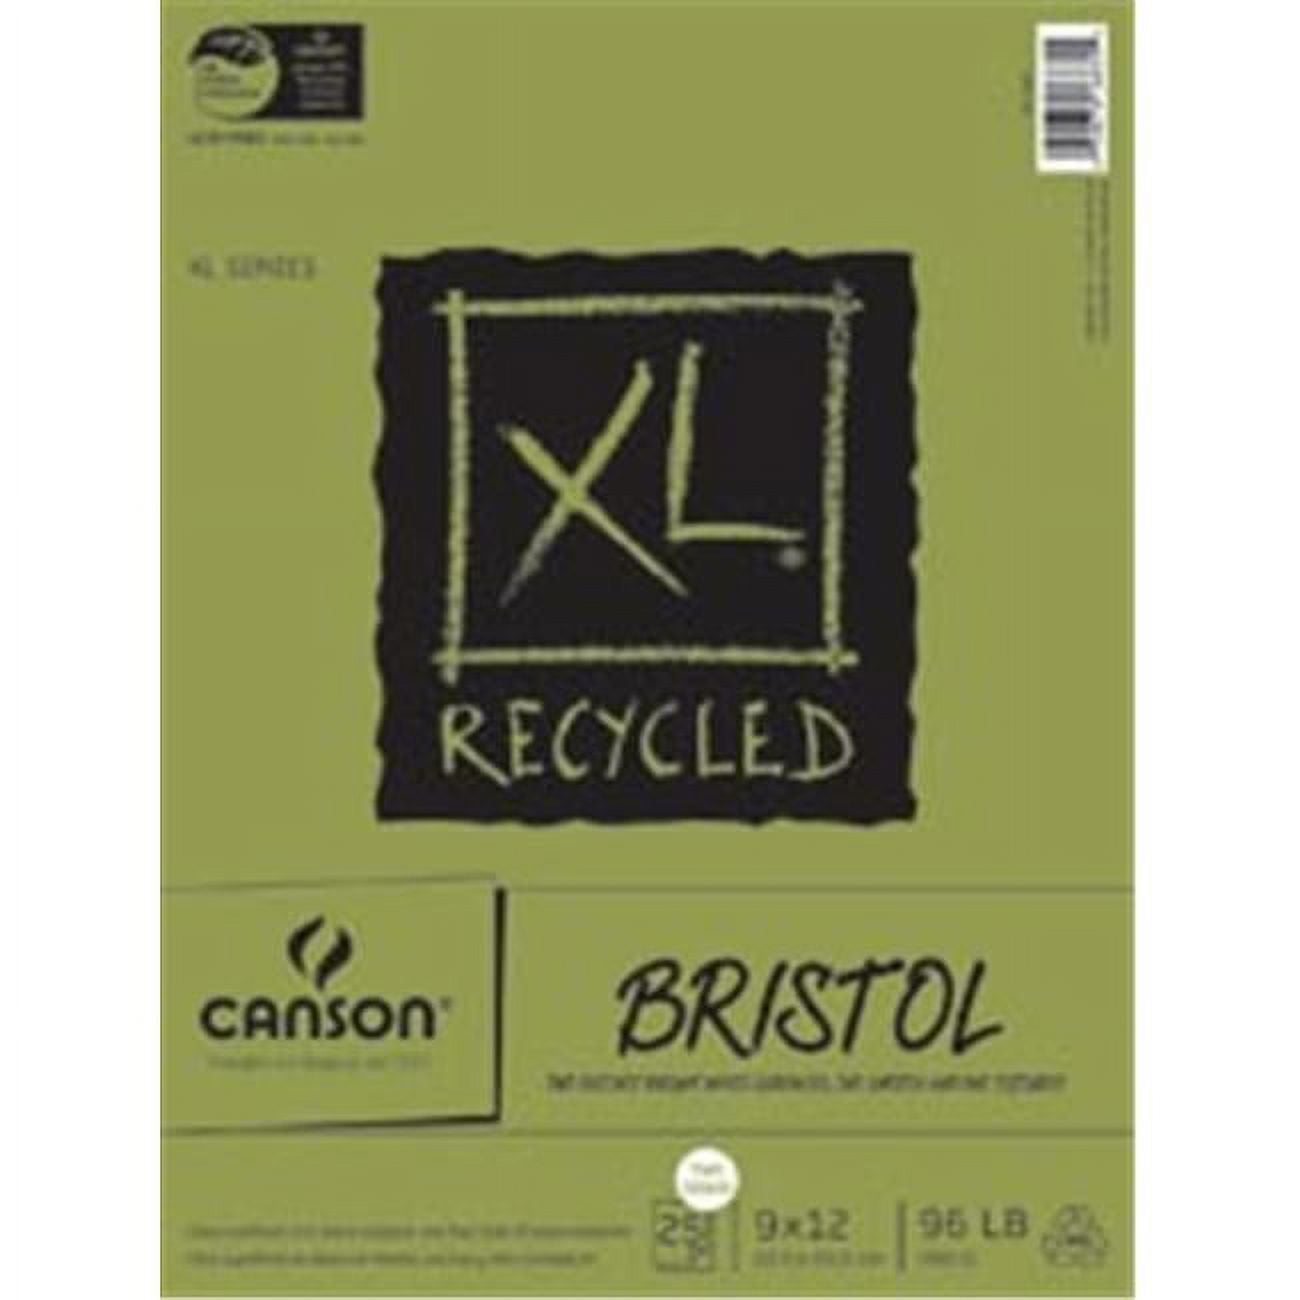 Canson XL Series Bristol Paper, Smooth, Foldover Pad, 9x12 inches, 25  Sheets (100lb/260g) - Artist Paper for Adults and Students - Markers, Pen  and Ink : Arts, Crafts & Sewing 